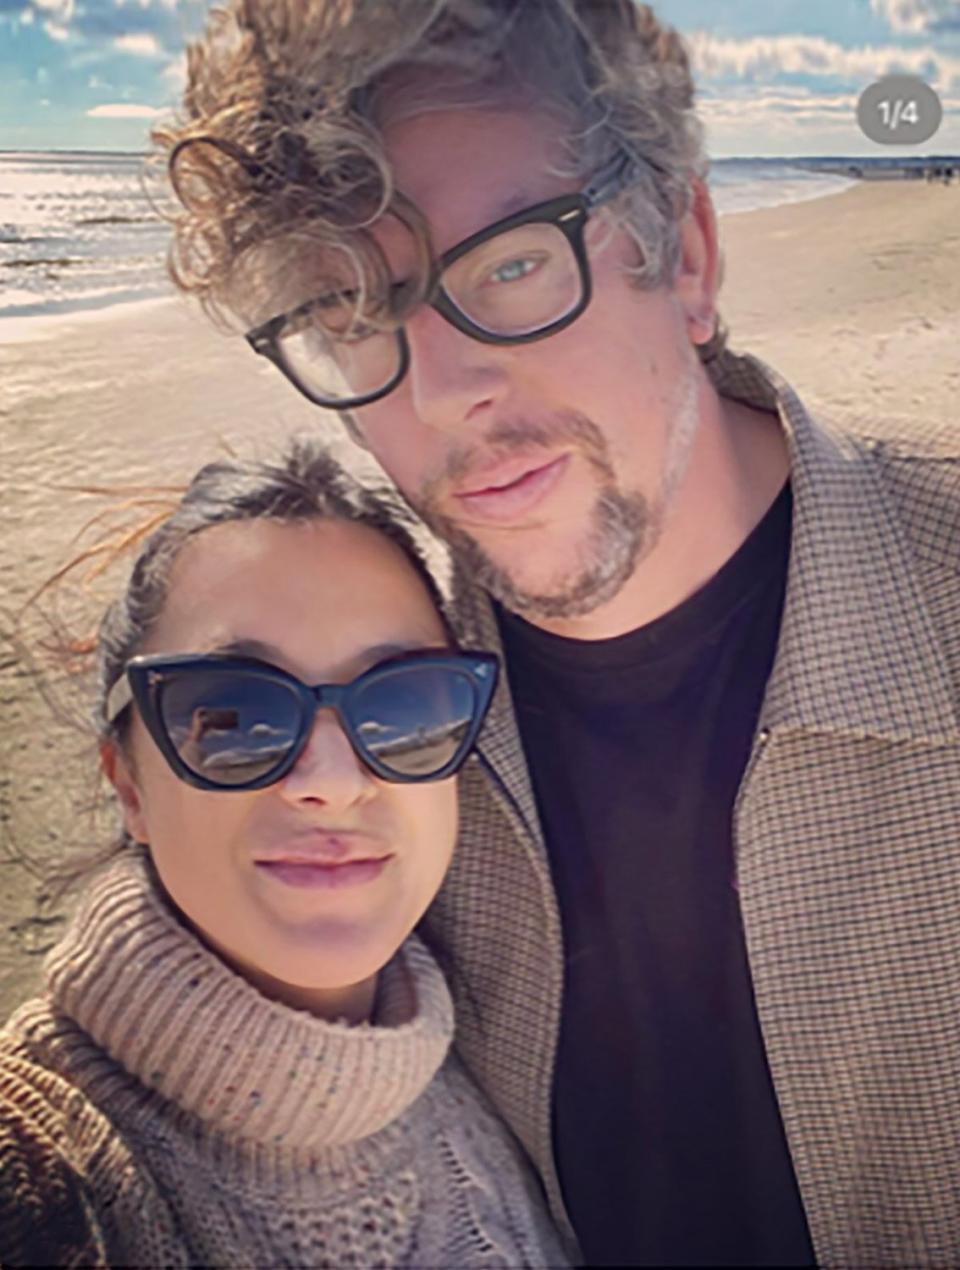 posted on Michelle Branchs instagram, 11/26/21- with husband